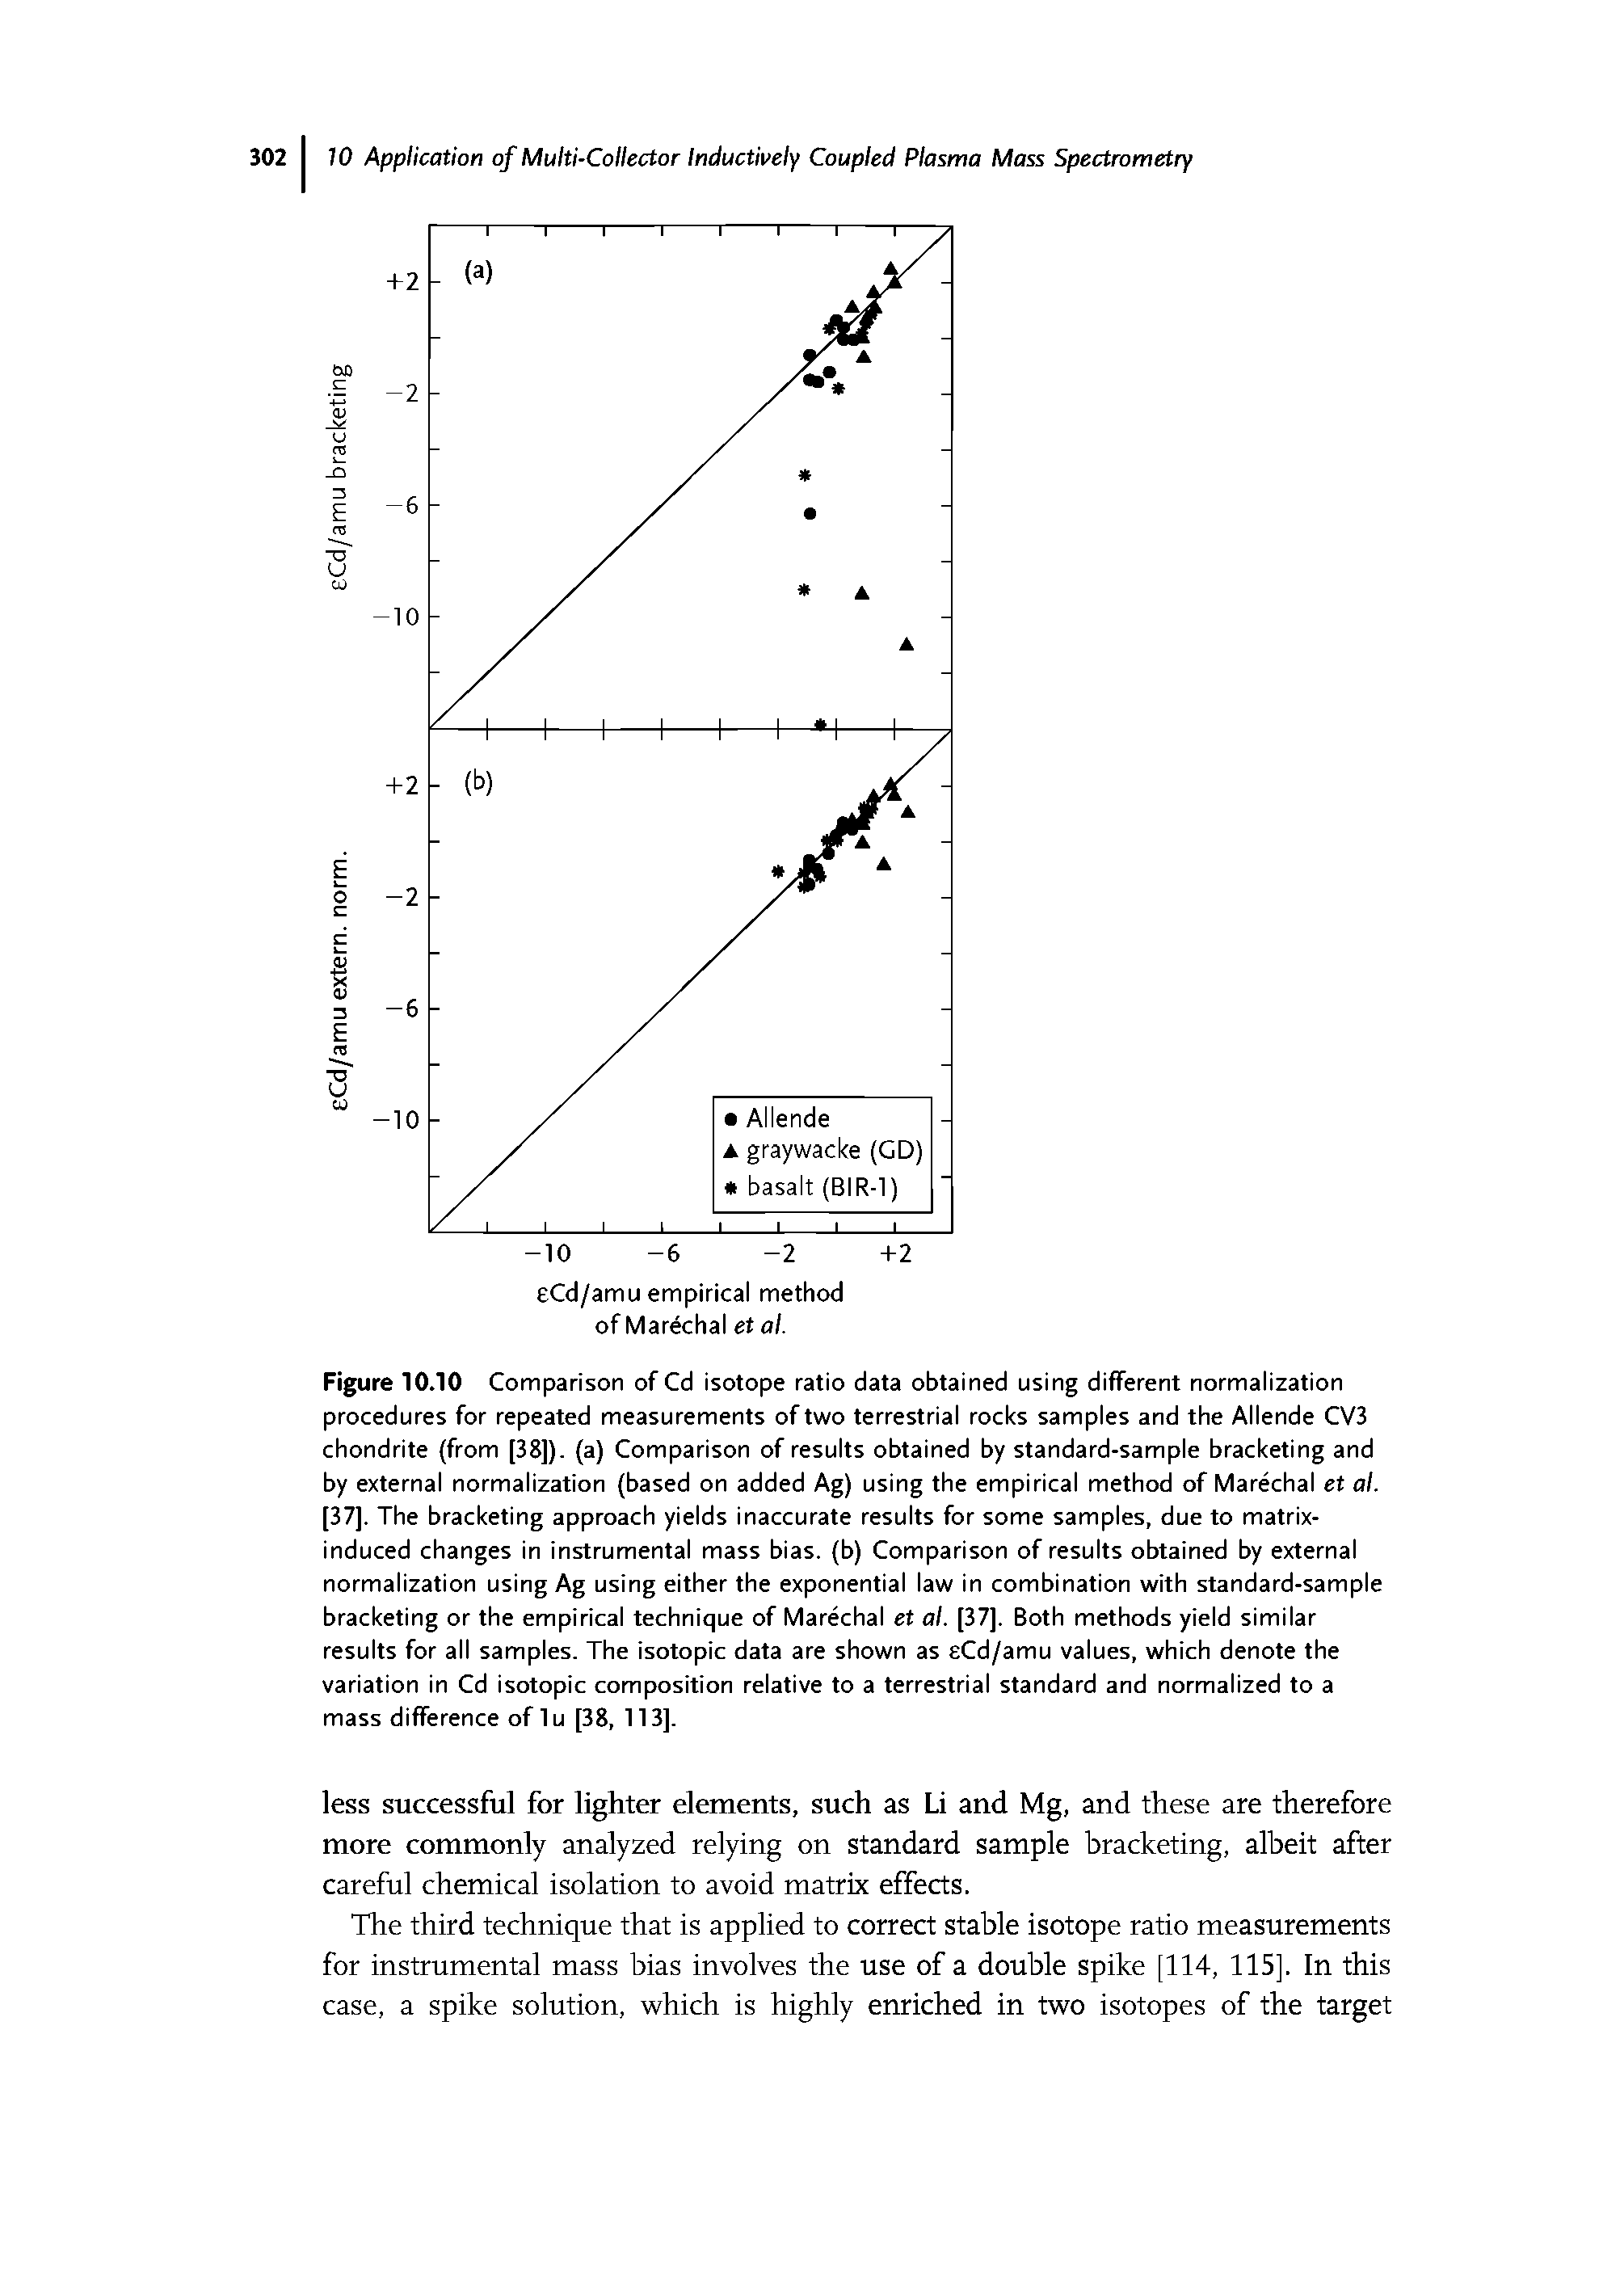 Figure 10.10 Comparison of Cd isotope ratio data obtained using different normalization procedures for repeated measurements of two terrestrial rocks samples and the Allende CVS chondrite (from [38]). (a) Comparison of results obtained by standard-sample bracketing and by external normalization (based on added Ag) using the empirical method of Marechal et al. [37], The bracketing approach yields inaccurate results for some samples, due to matrix-induced changes in instrumental mass bias, (b) Comparison of results obtained by external normalization using Ag using either the exponential law in combination with standard-sample bracketing or the empirical technique of Marechal et al. [37]. Both methods yield similar results for all samples. The isotopic data are shown as eCd/amu values, which denote the variation in Cd isotopic composition relative to a terrestrial standard and normalized to a mass difference of lu [38, 113].